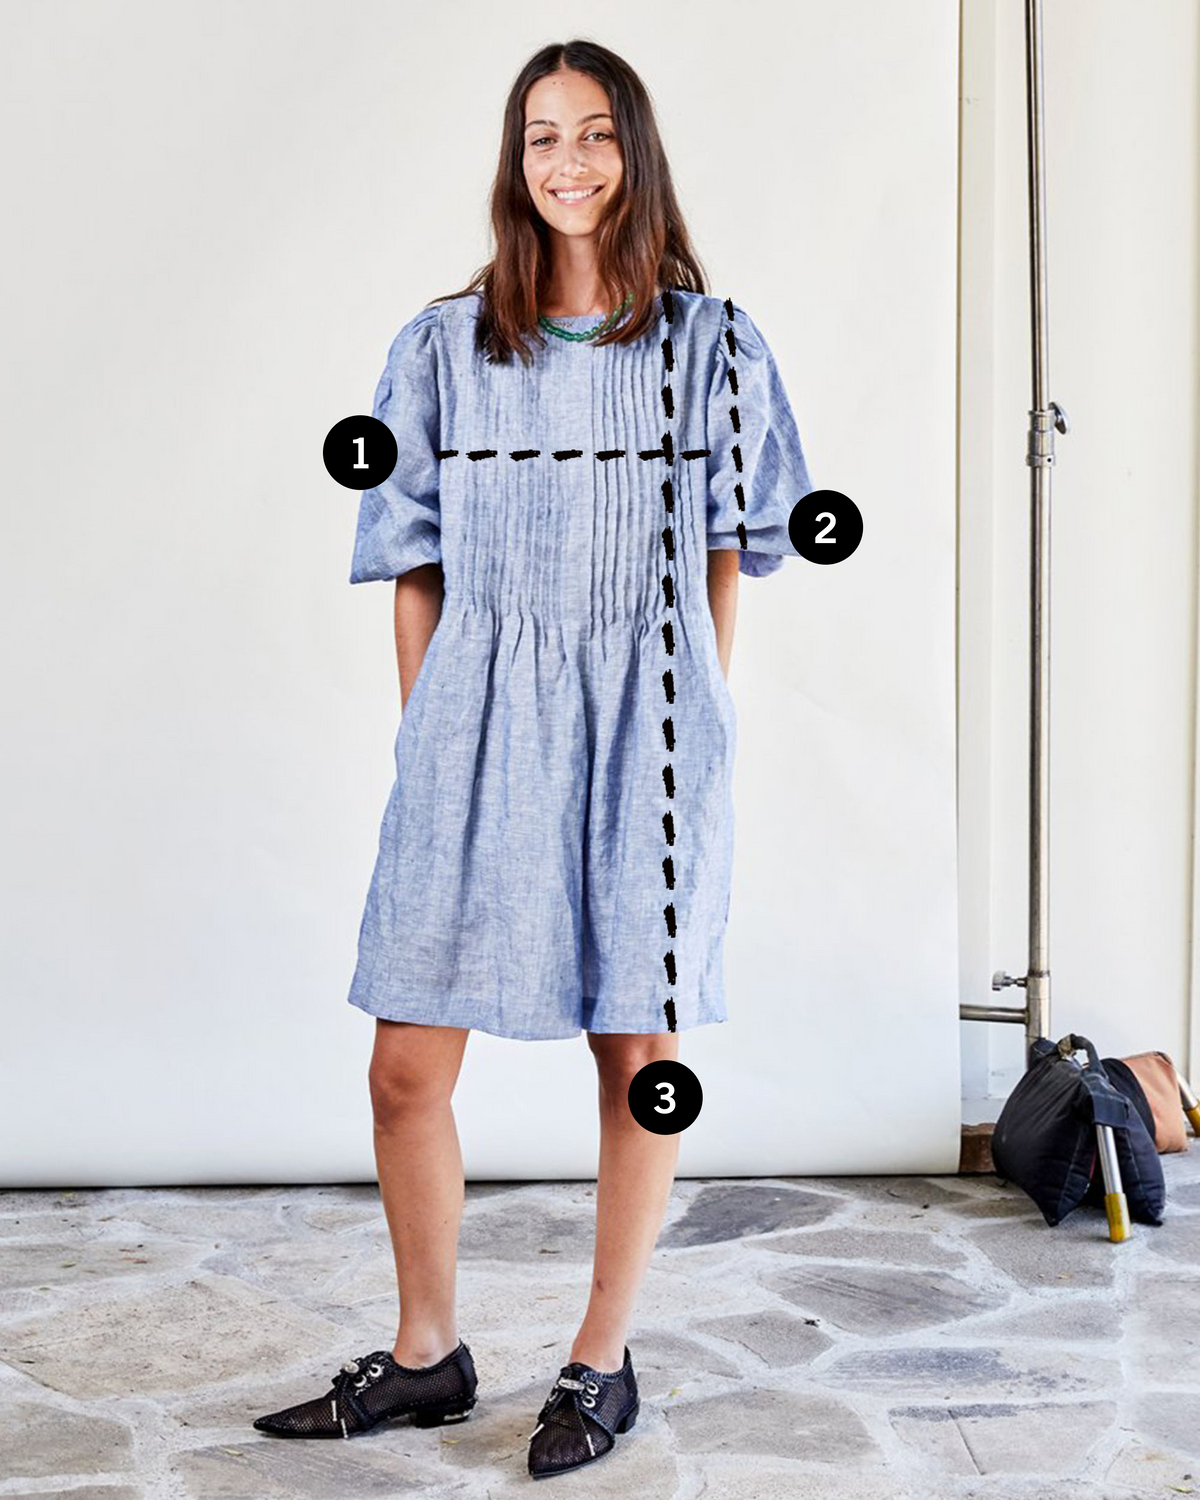 image of Frannie in a blue dress with with 3 lines depicting where the user should measure for their bust, sleeve and length measurements in comparison to the garment